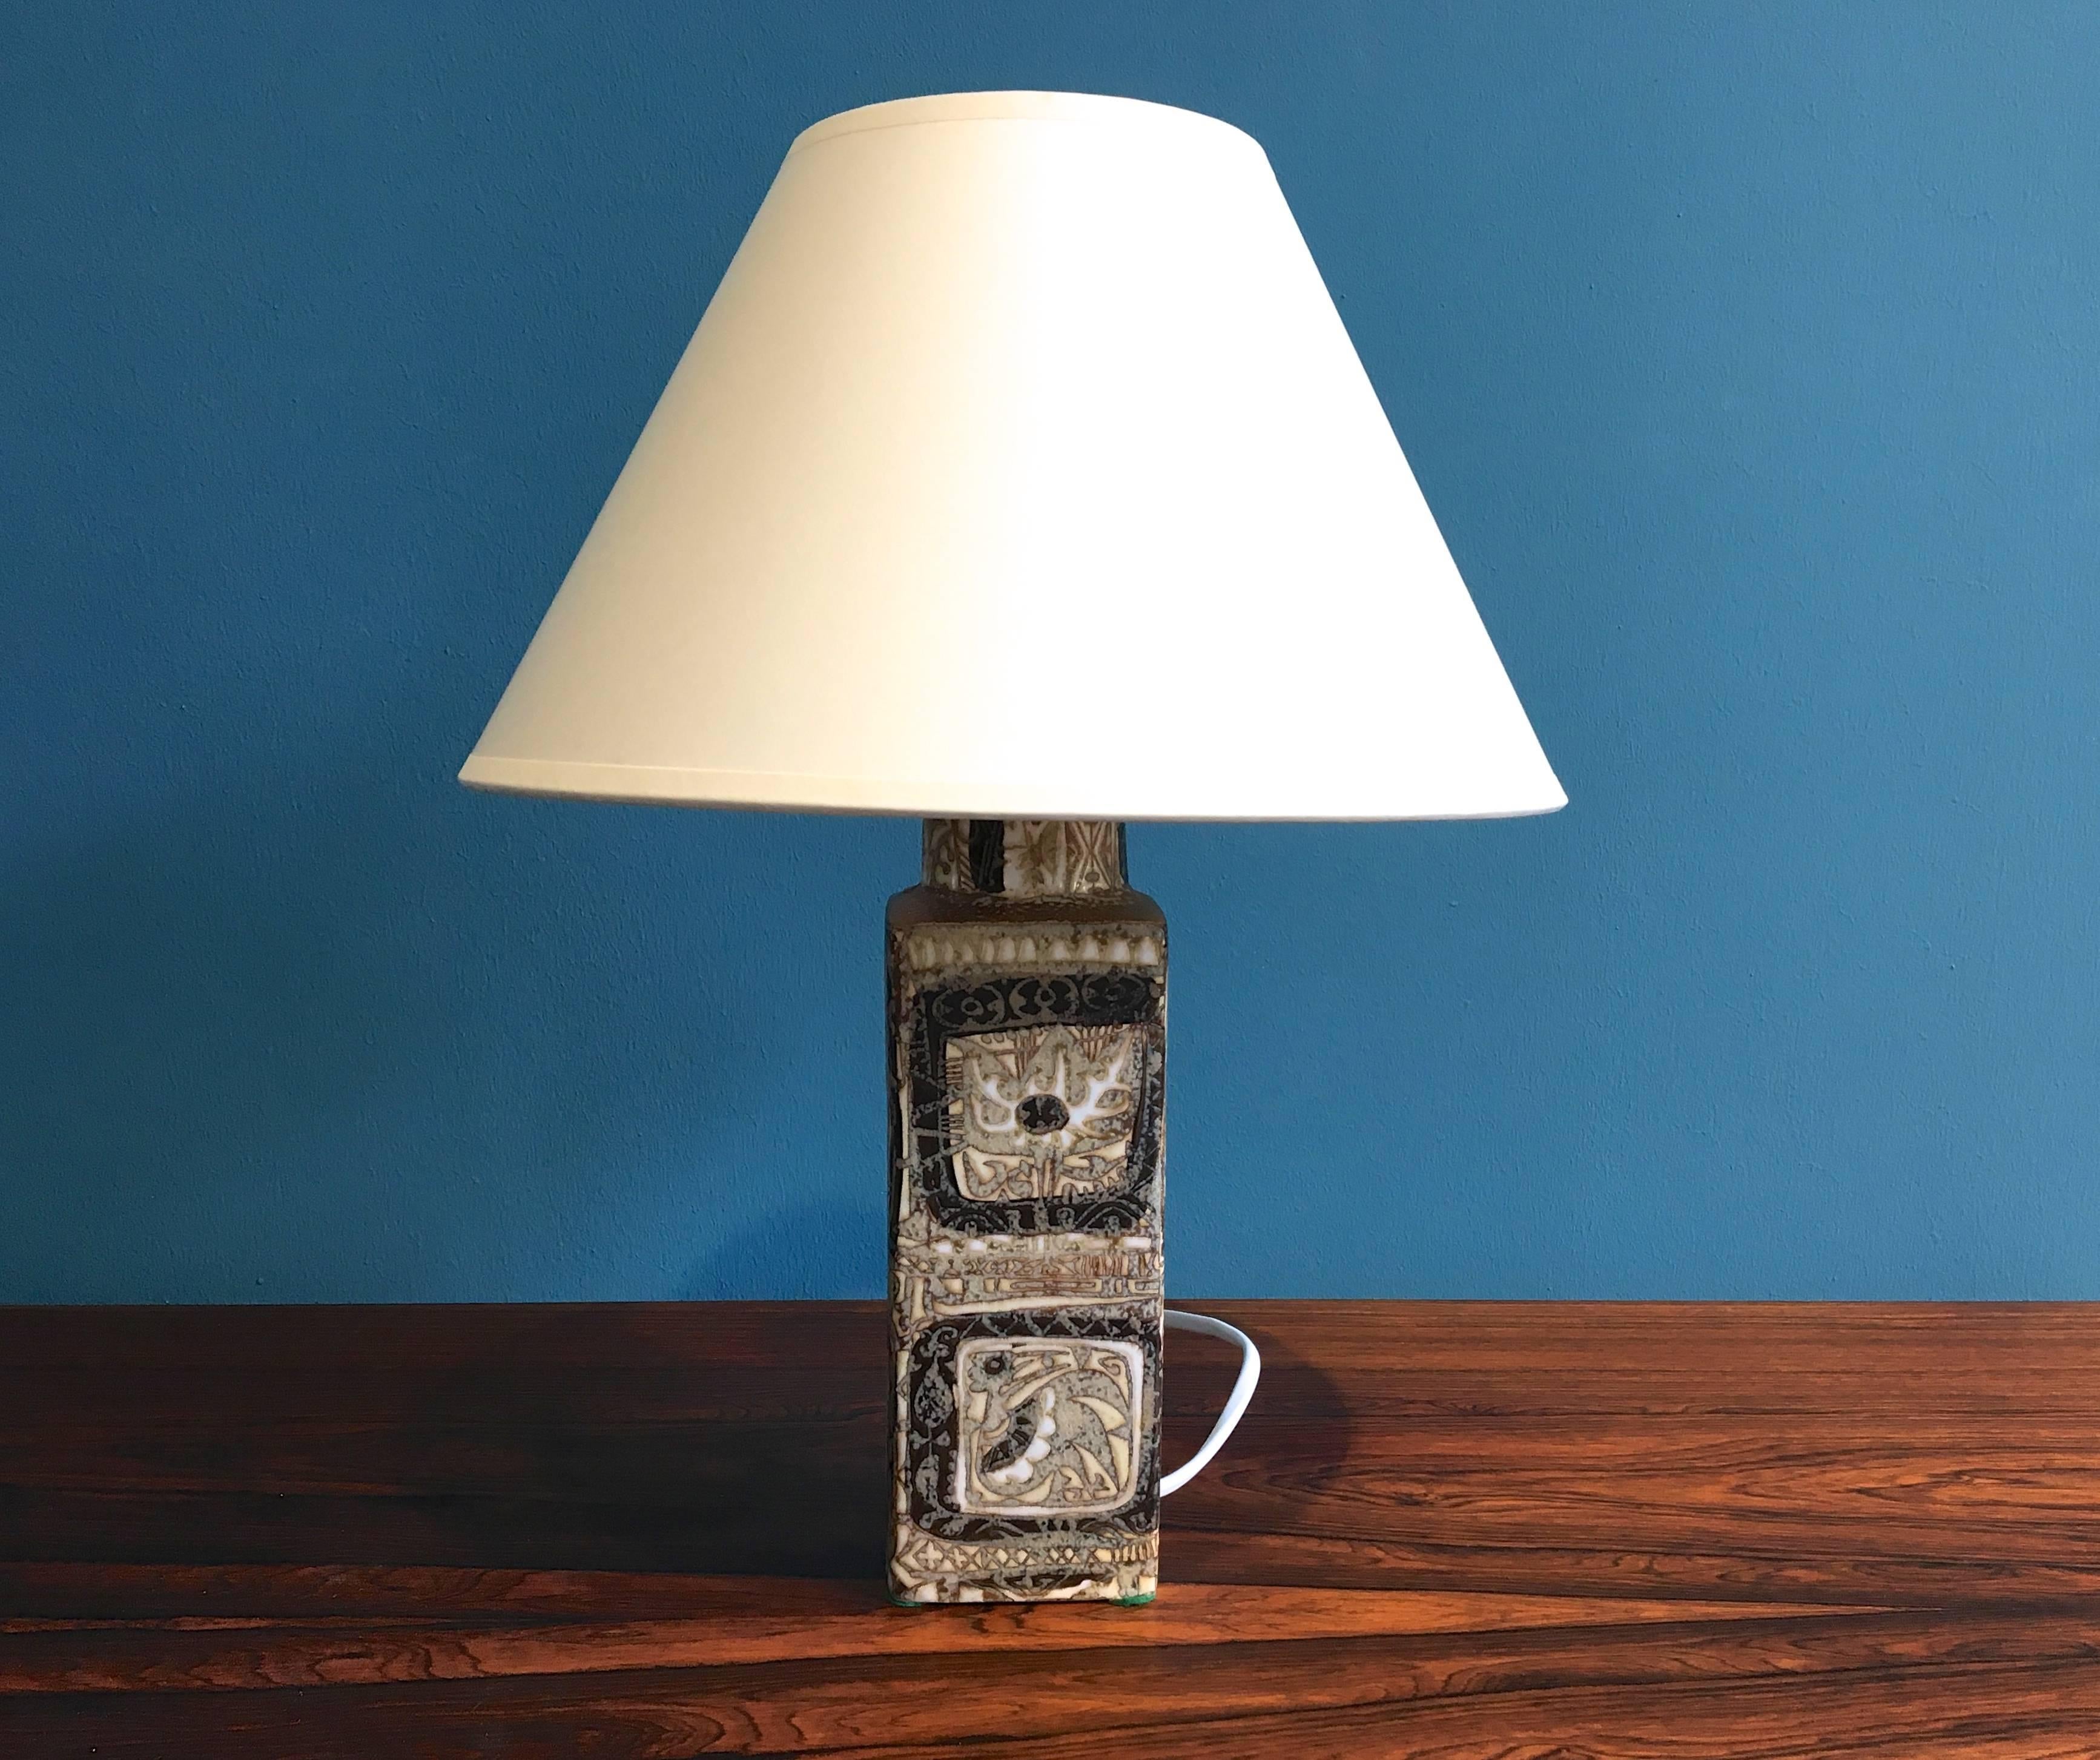 This table lamp was designed by Royal Copenhagen's head designer for the BACA series, Nils Thorsson in the 1960s. It was produced by Danish company Fog & Mørup. The base is made of stoneware and features Thorssons famous pattern showing abstract